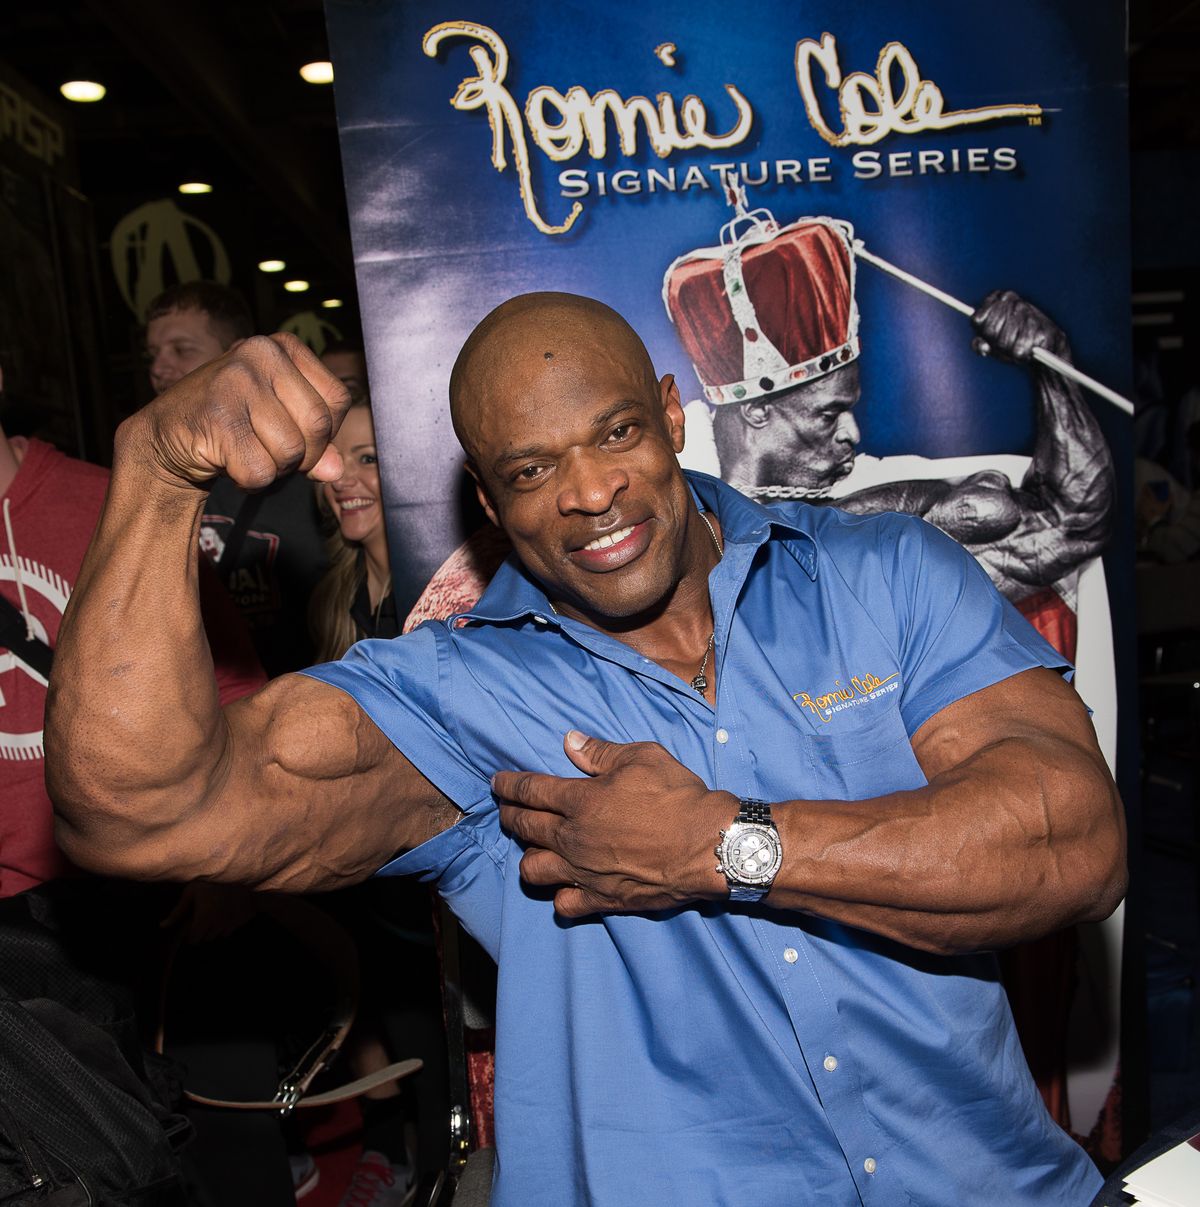 https://hips.hearstapps.com/hmg-prod/images/ronnie-coleman-attends-the-arnold-sports-festival-2015-day-news-photo-1594228362.jpg?crop=1.00xw:0.724xh;0,0.161xh&resize=1200:*